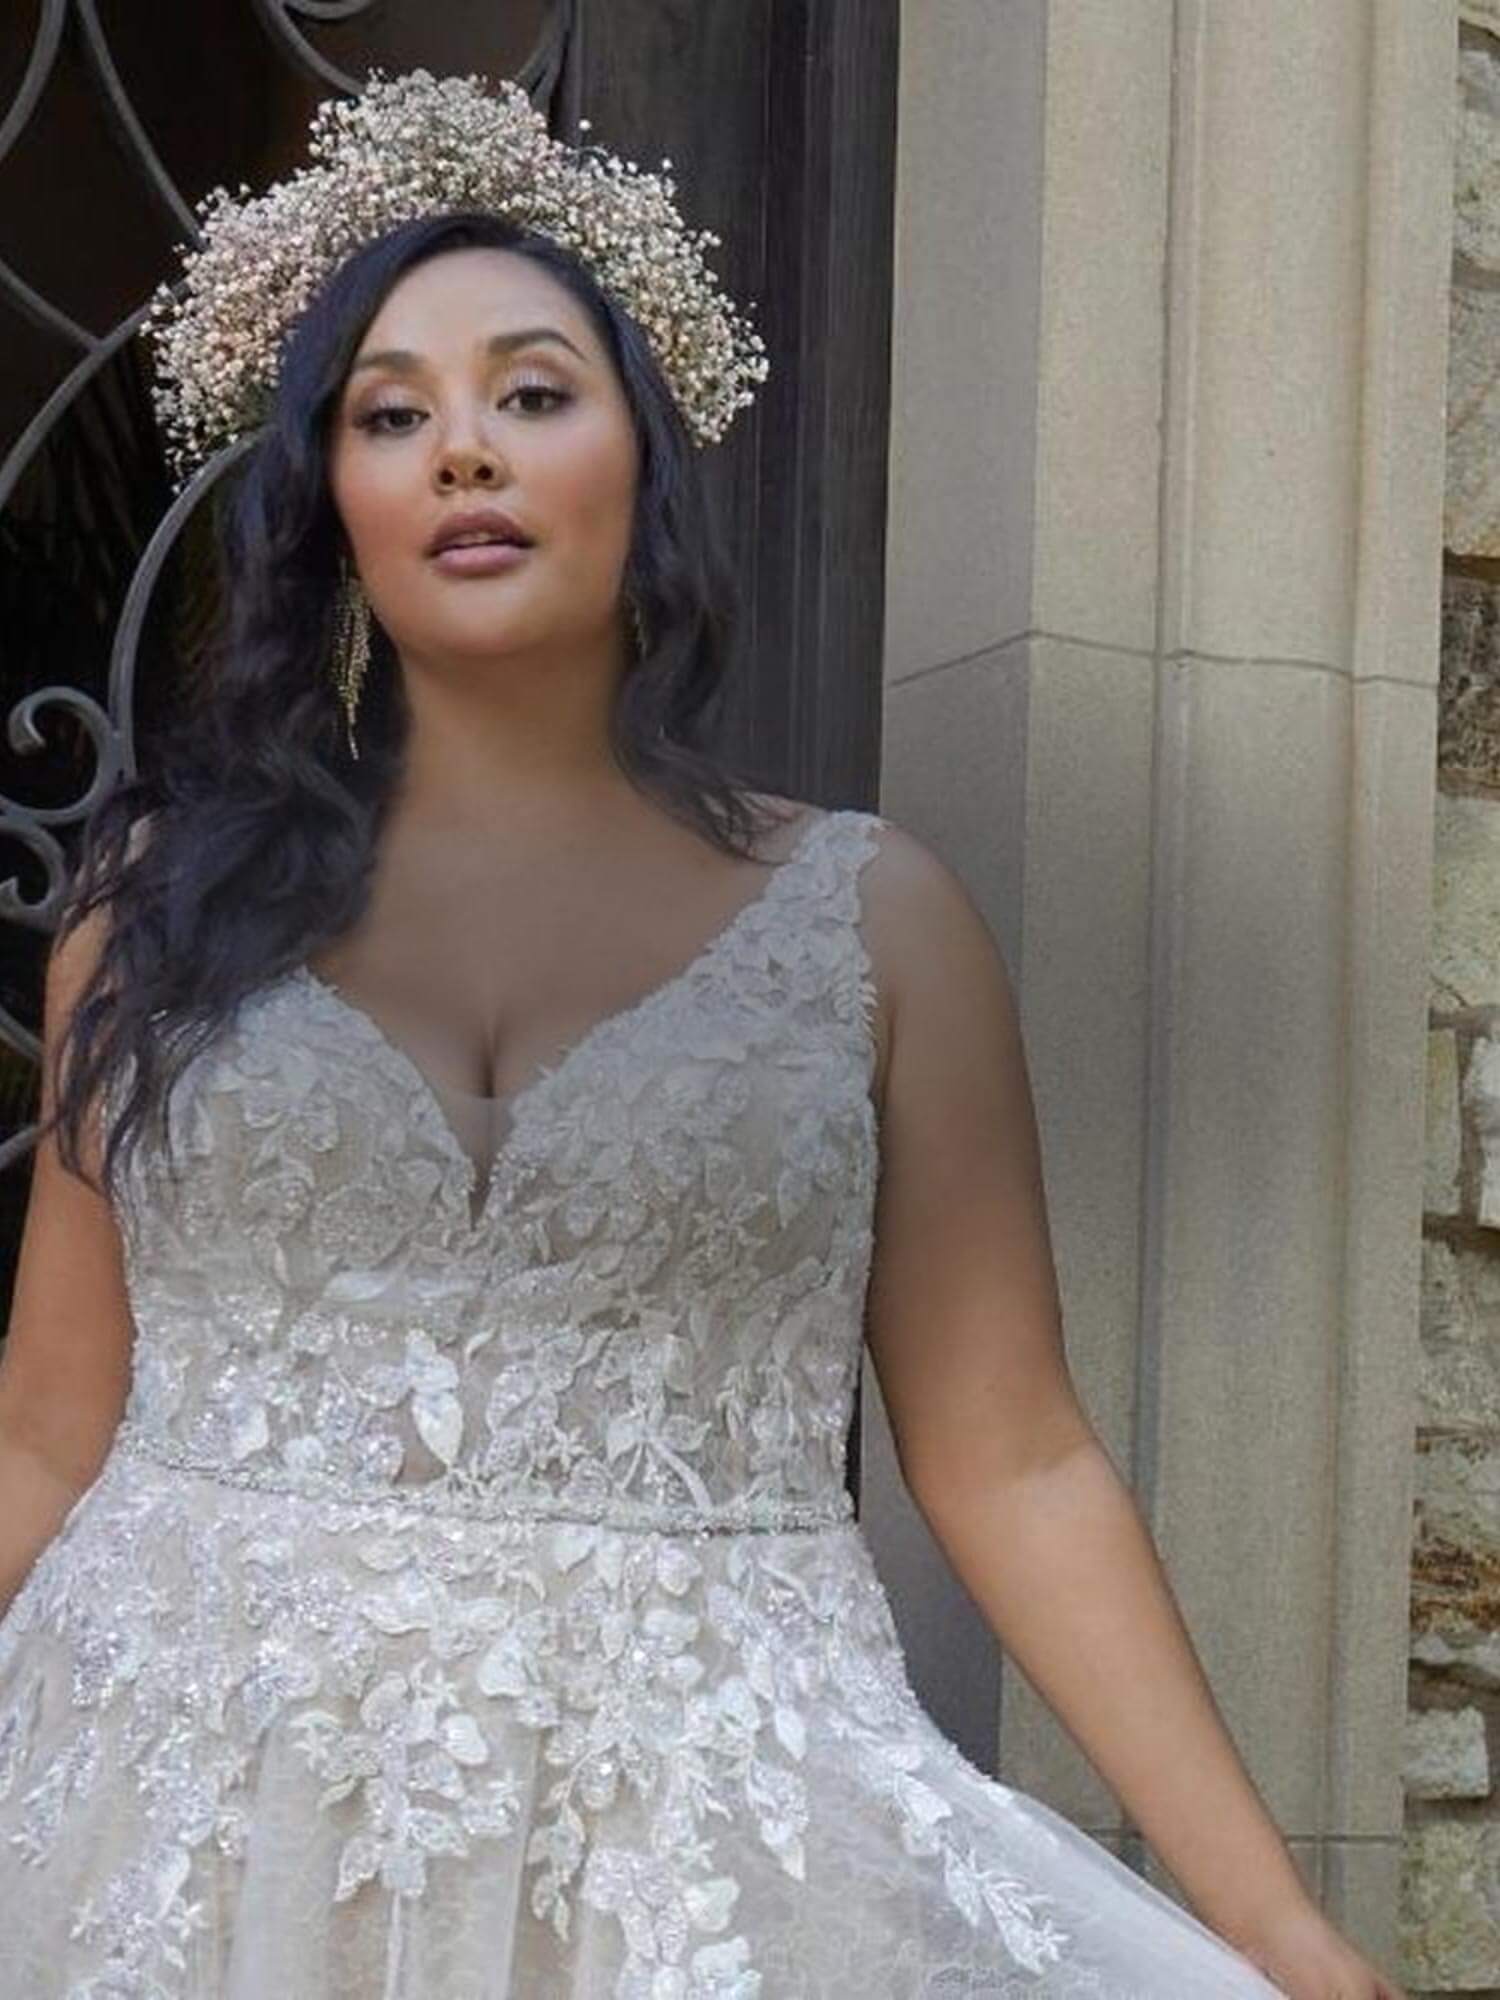 Photo of Plus Size Model wearing a bridal gown